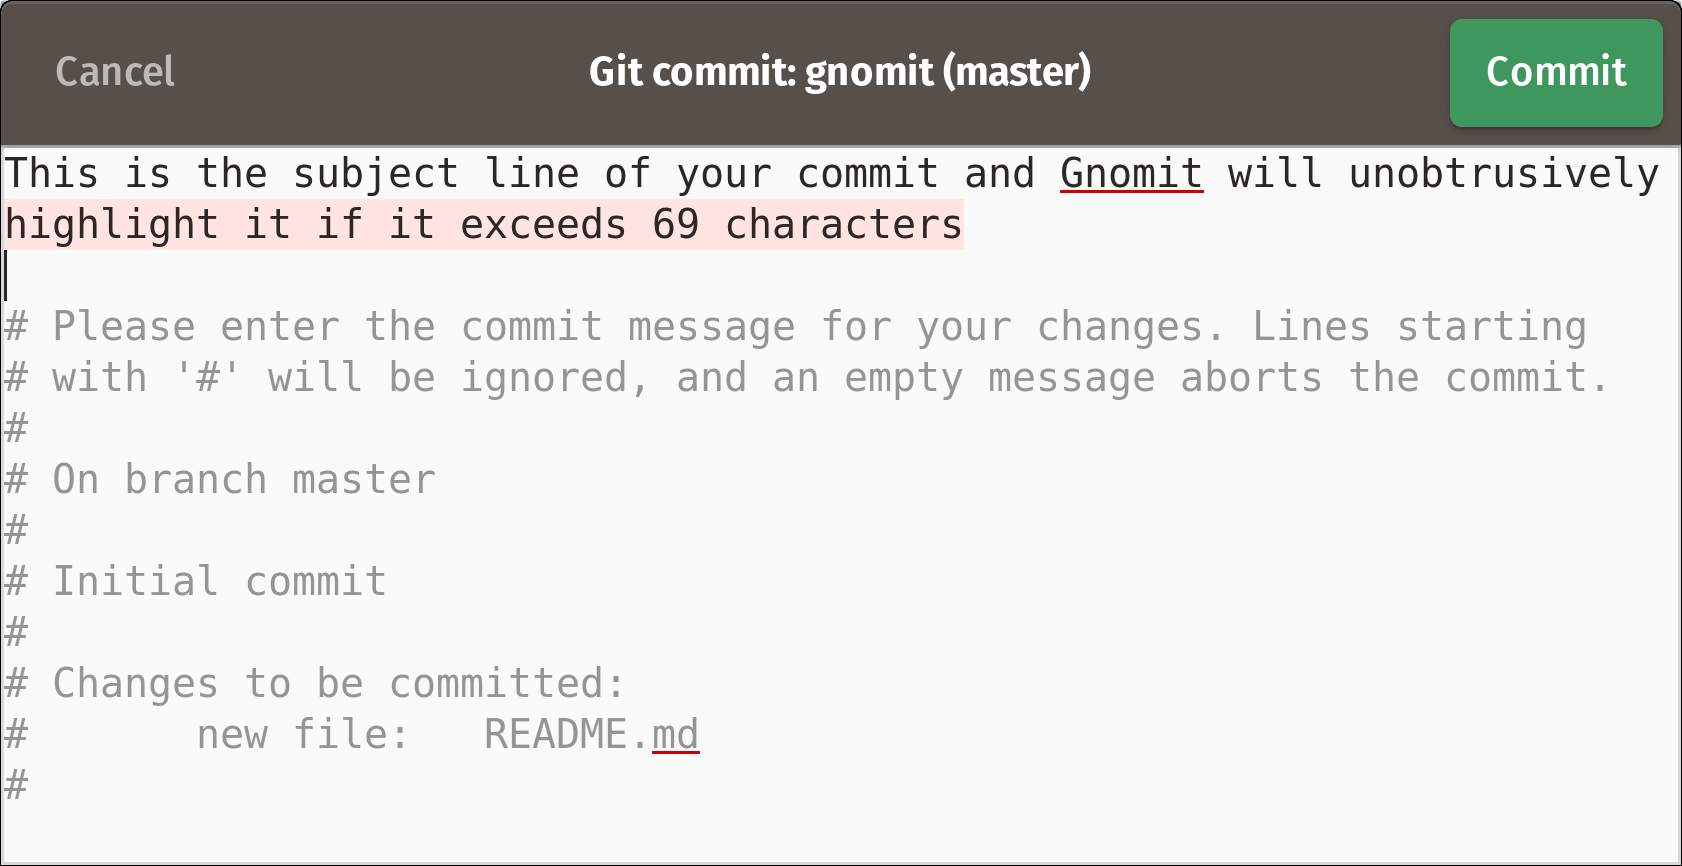 Gnomit’s git message composition window showing the new look with a standard window that contains the Cancel and Commit buttons.